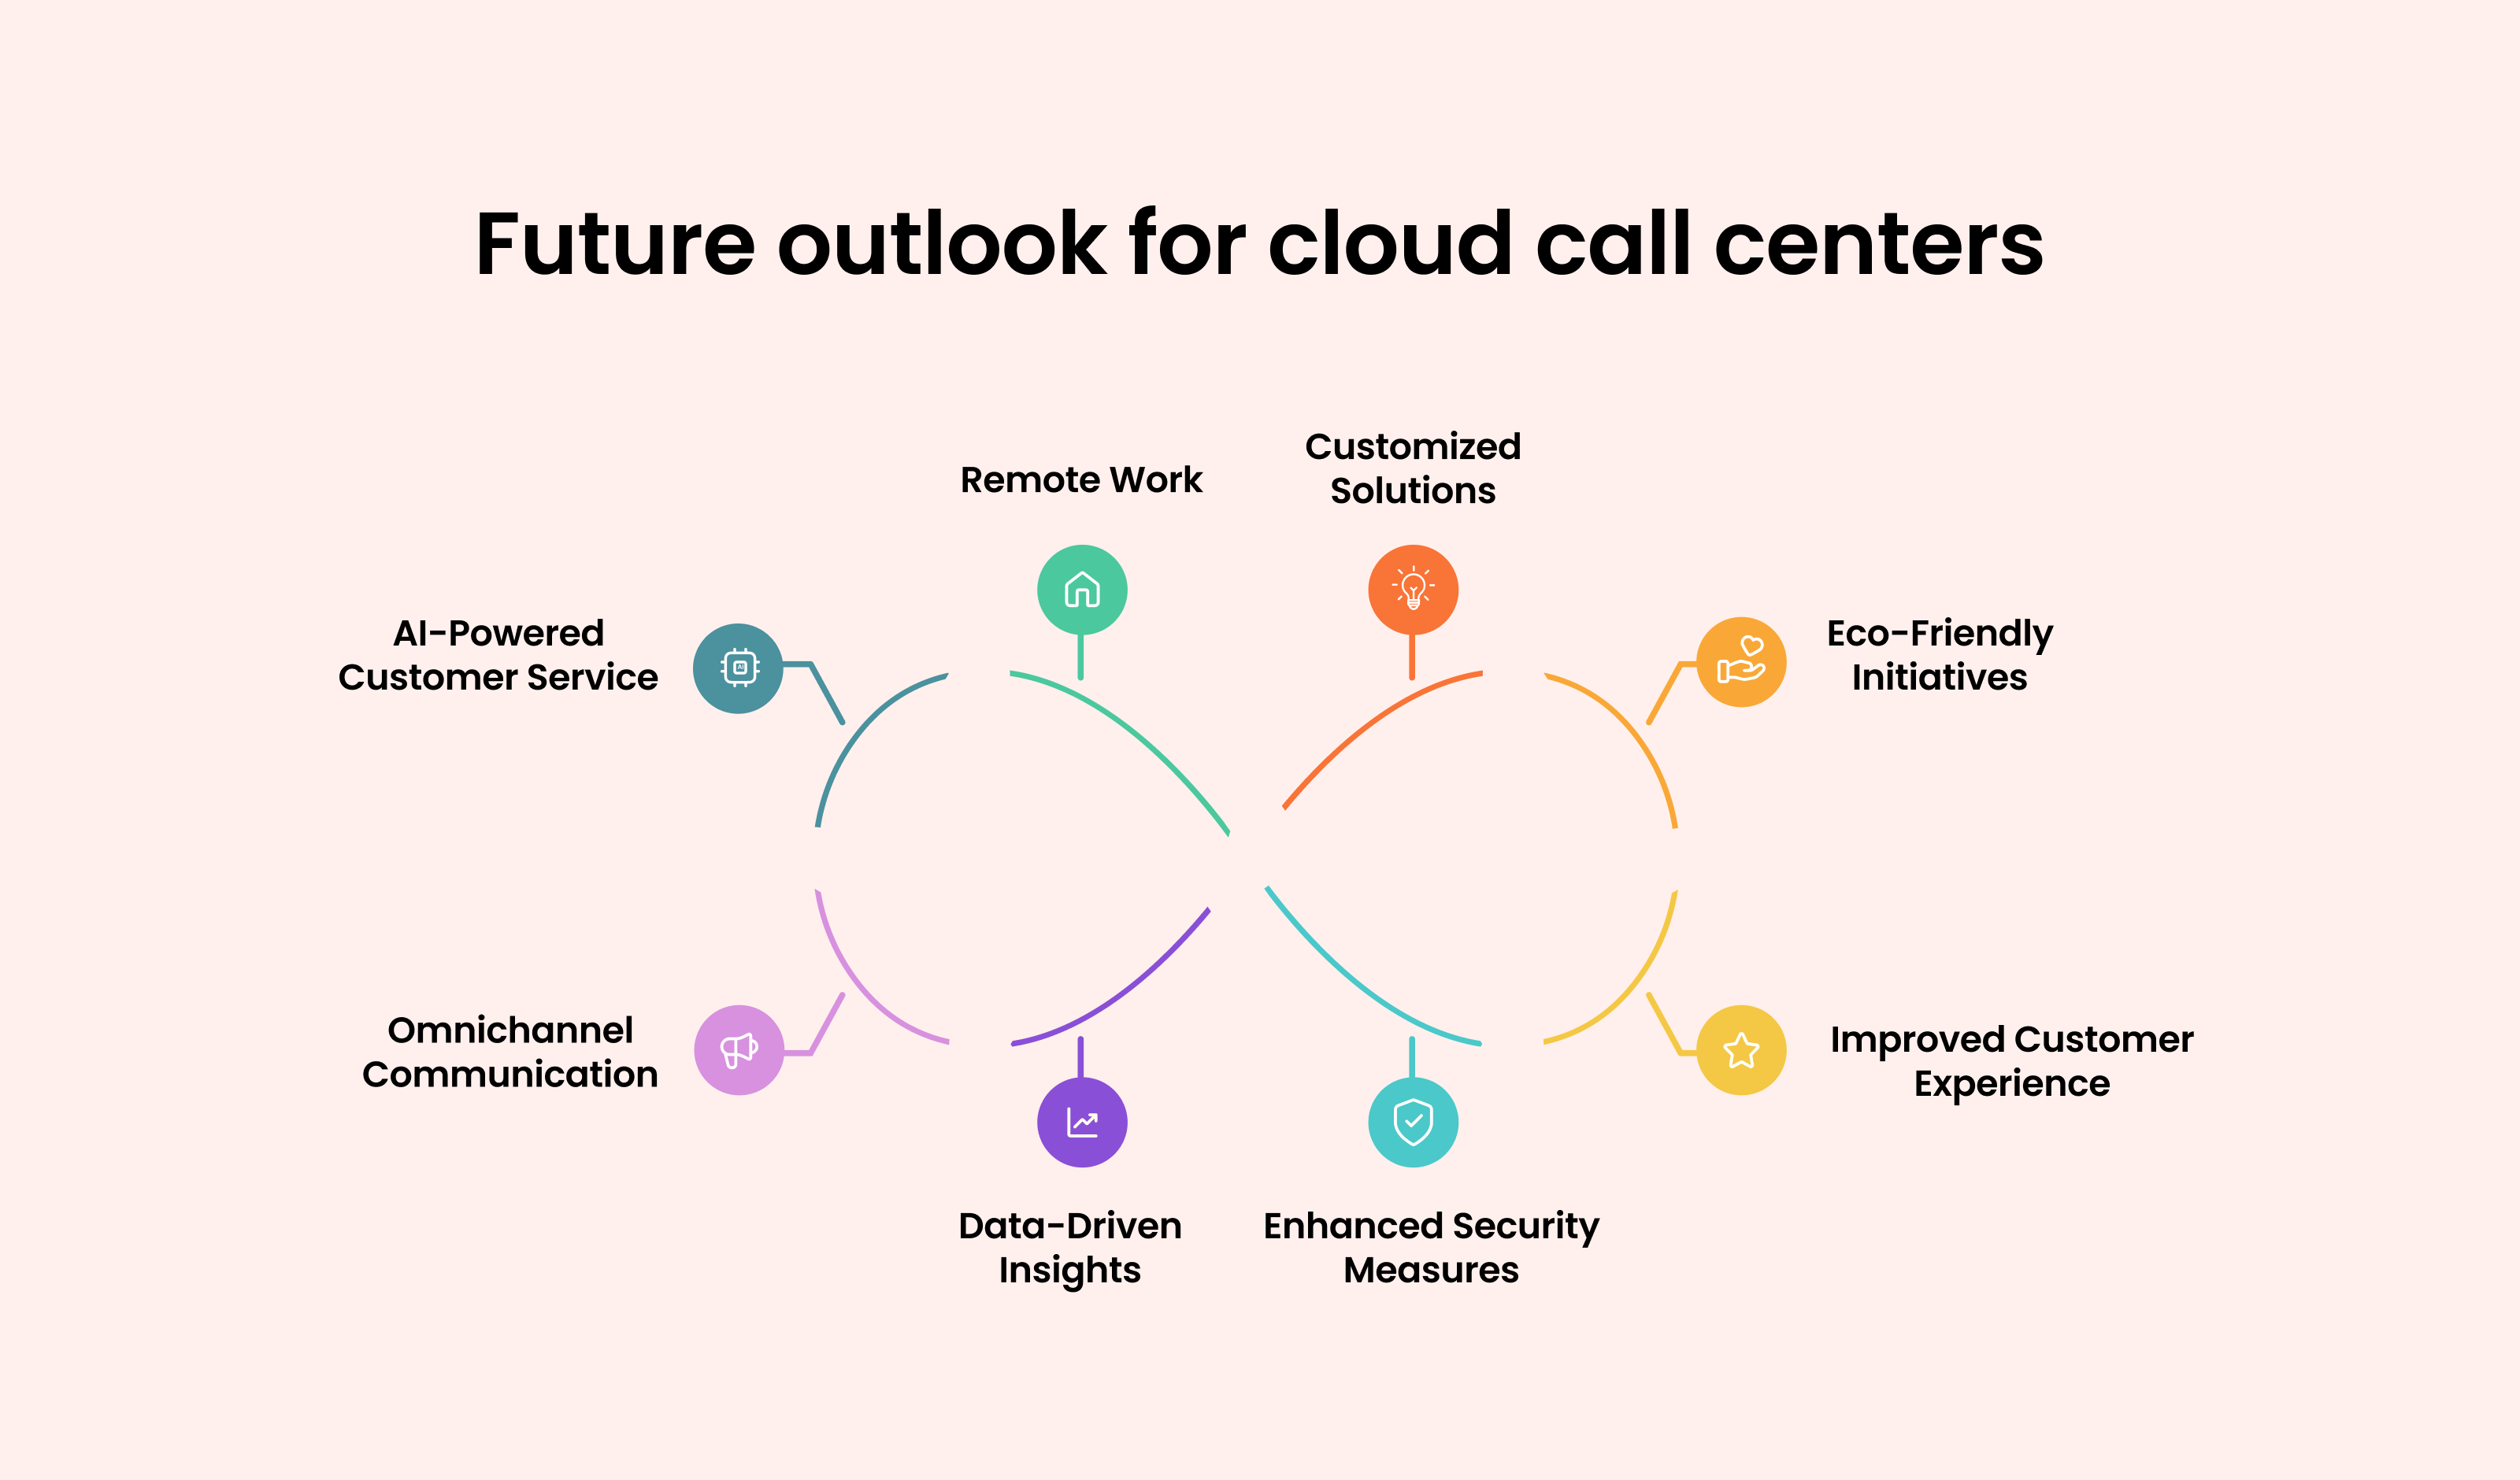 Future Outlook for Cloud Call Centers: